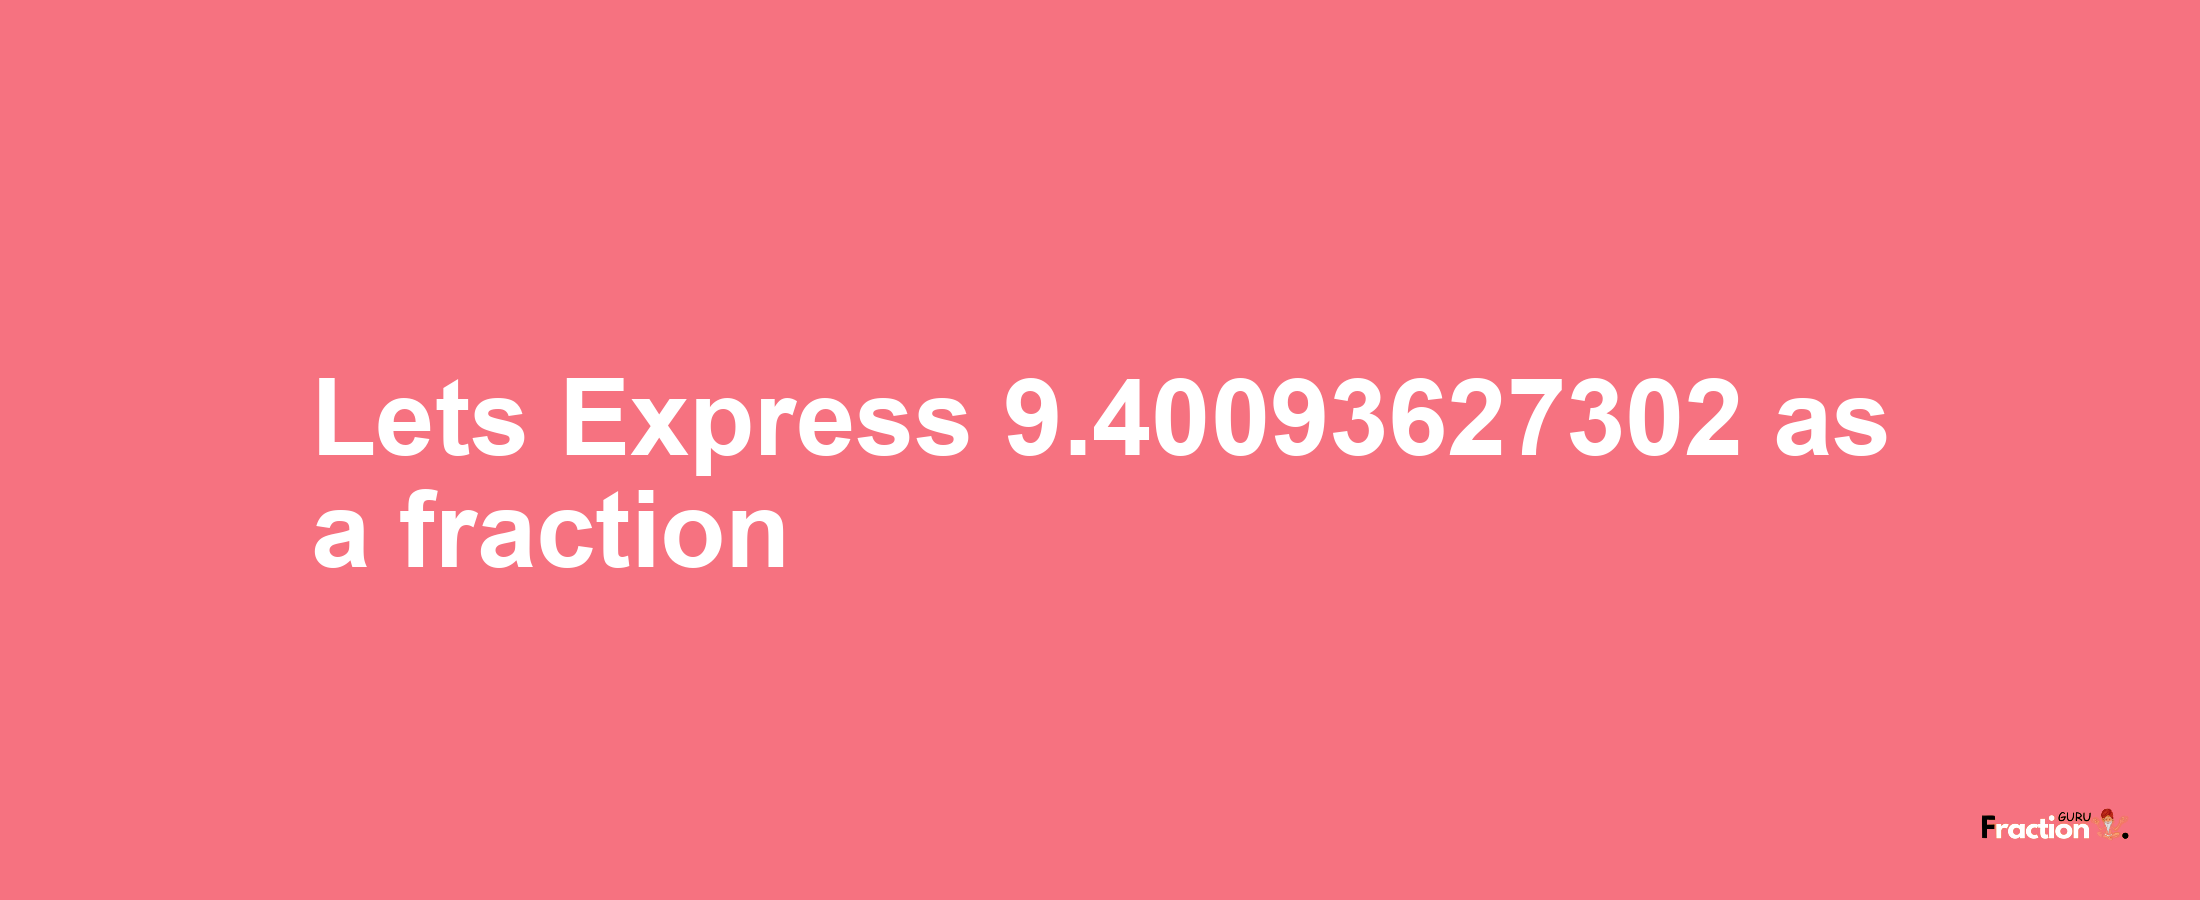 Lets Express 9.40093627302 as afraction